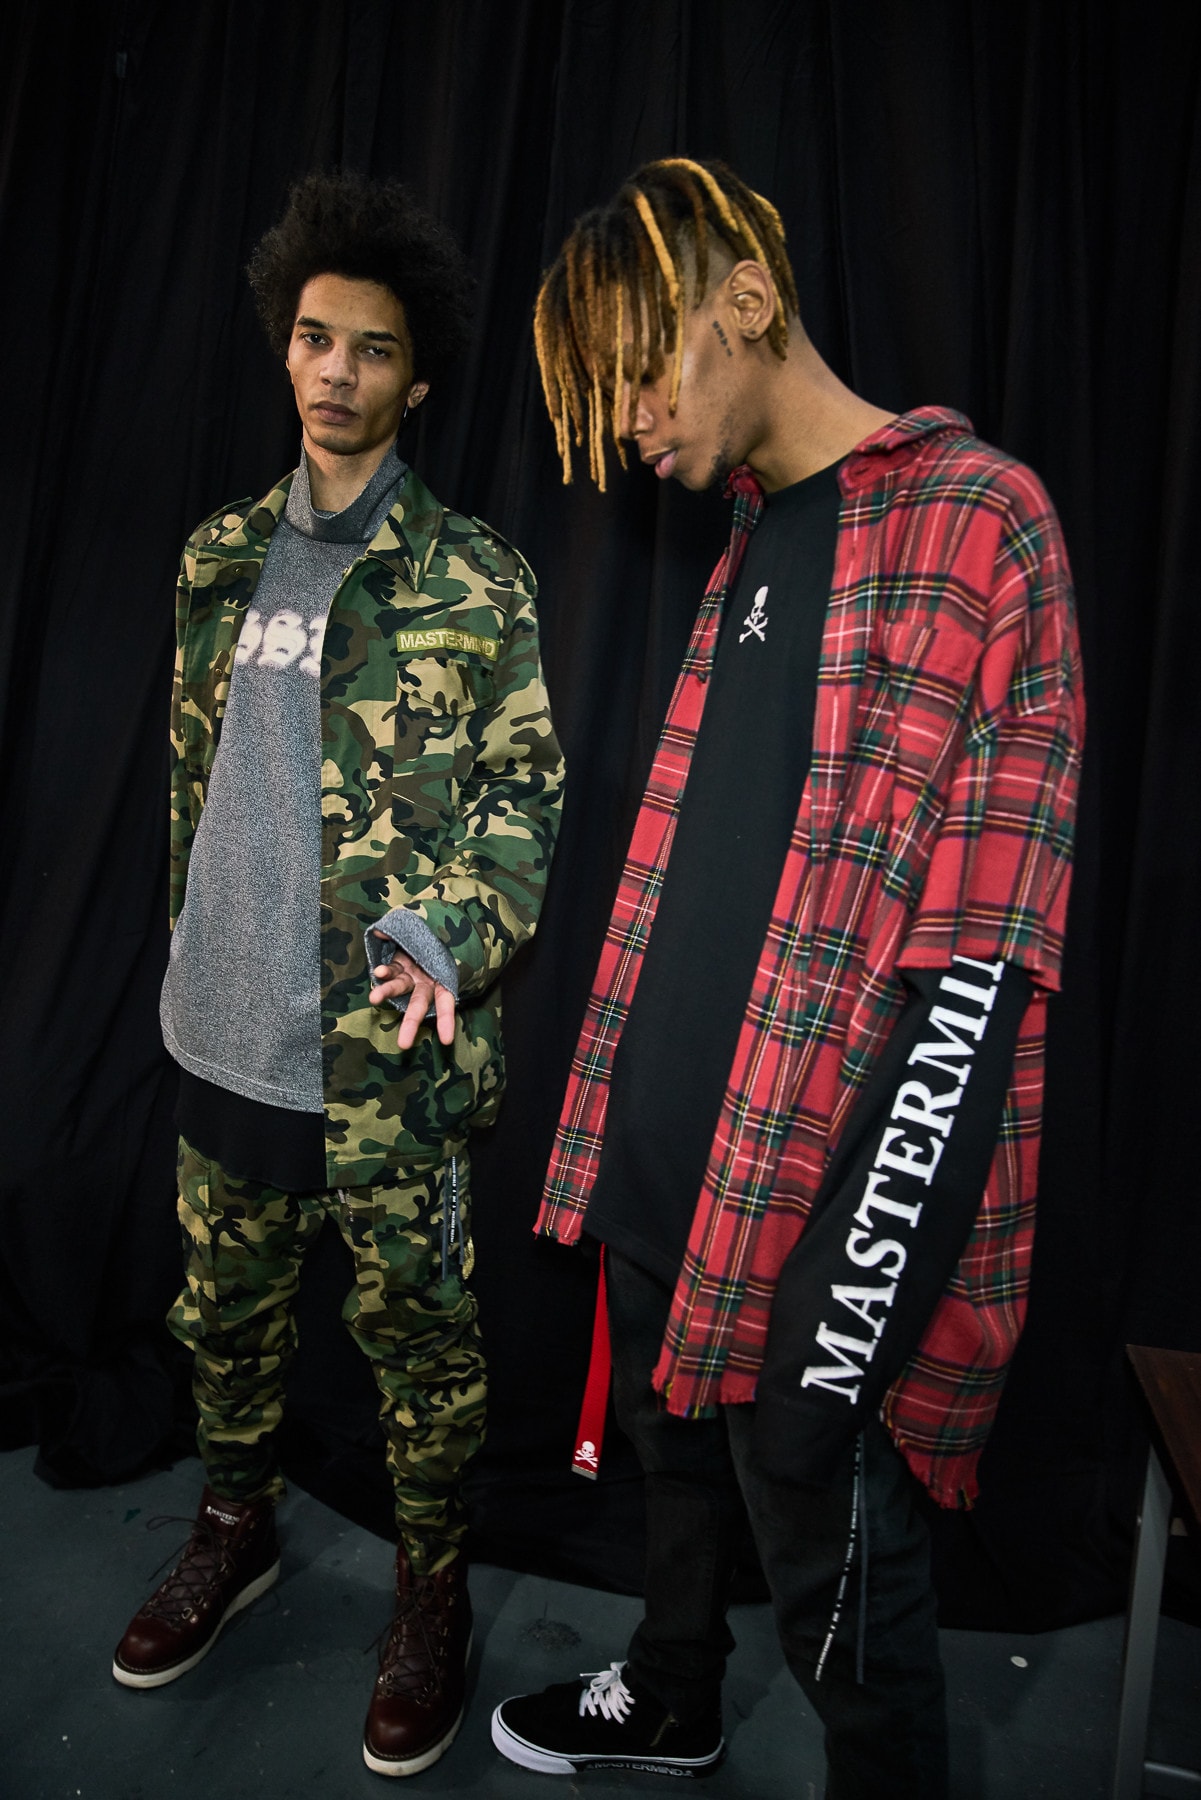 MASTERMIND WORLD Fall/Winter 2018 Runway Scene 1 Mission Collection FW18